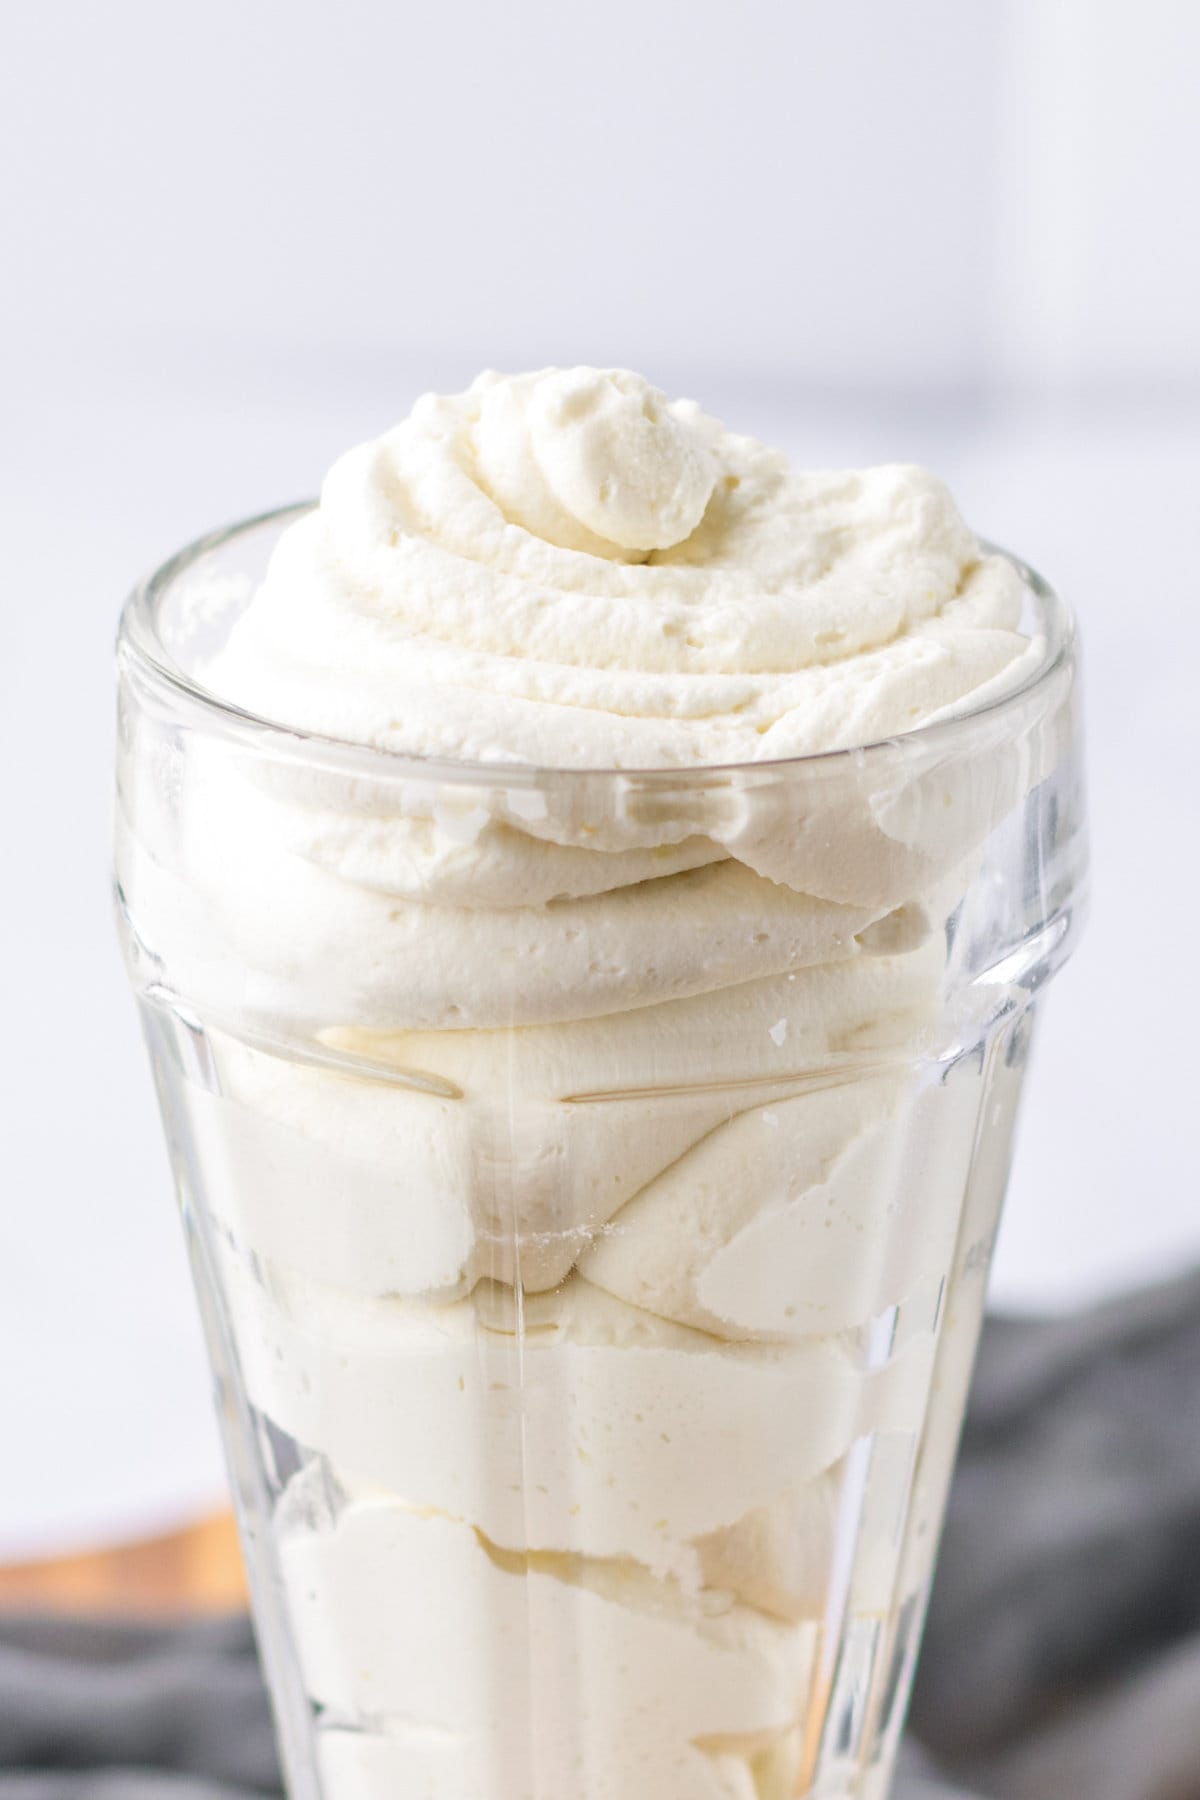 Homemade cool whip substitute in a glass.